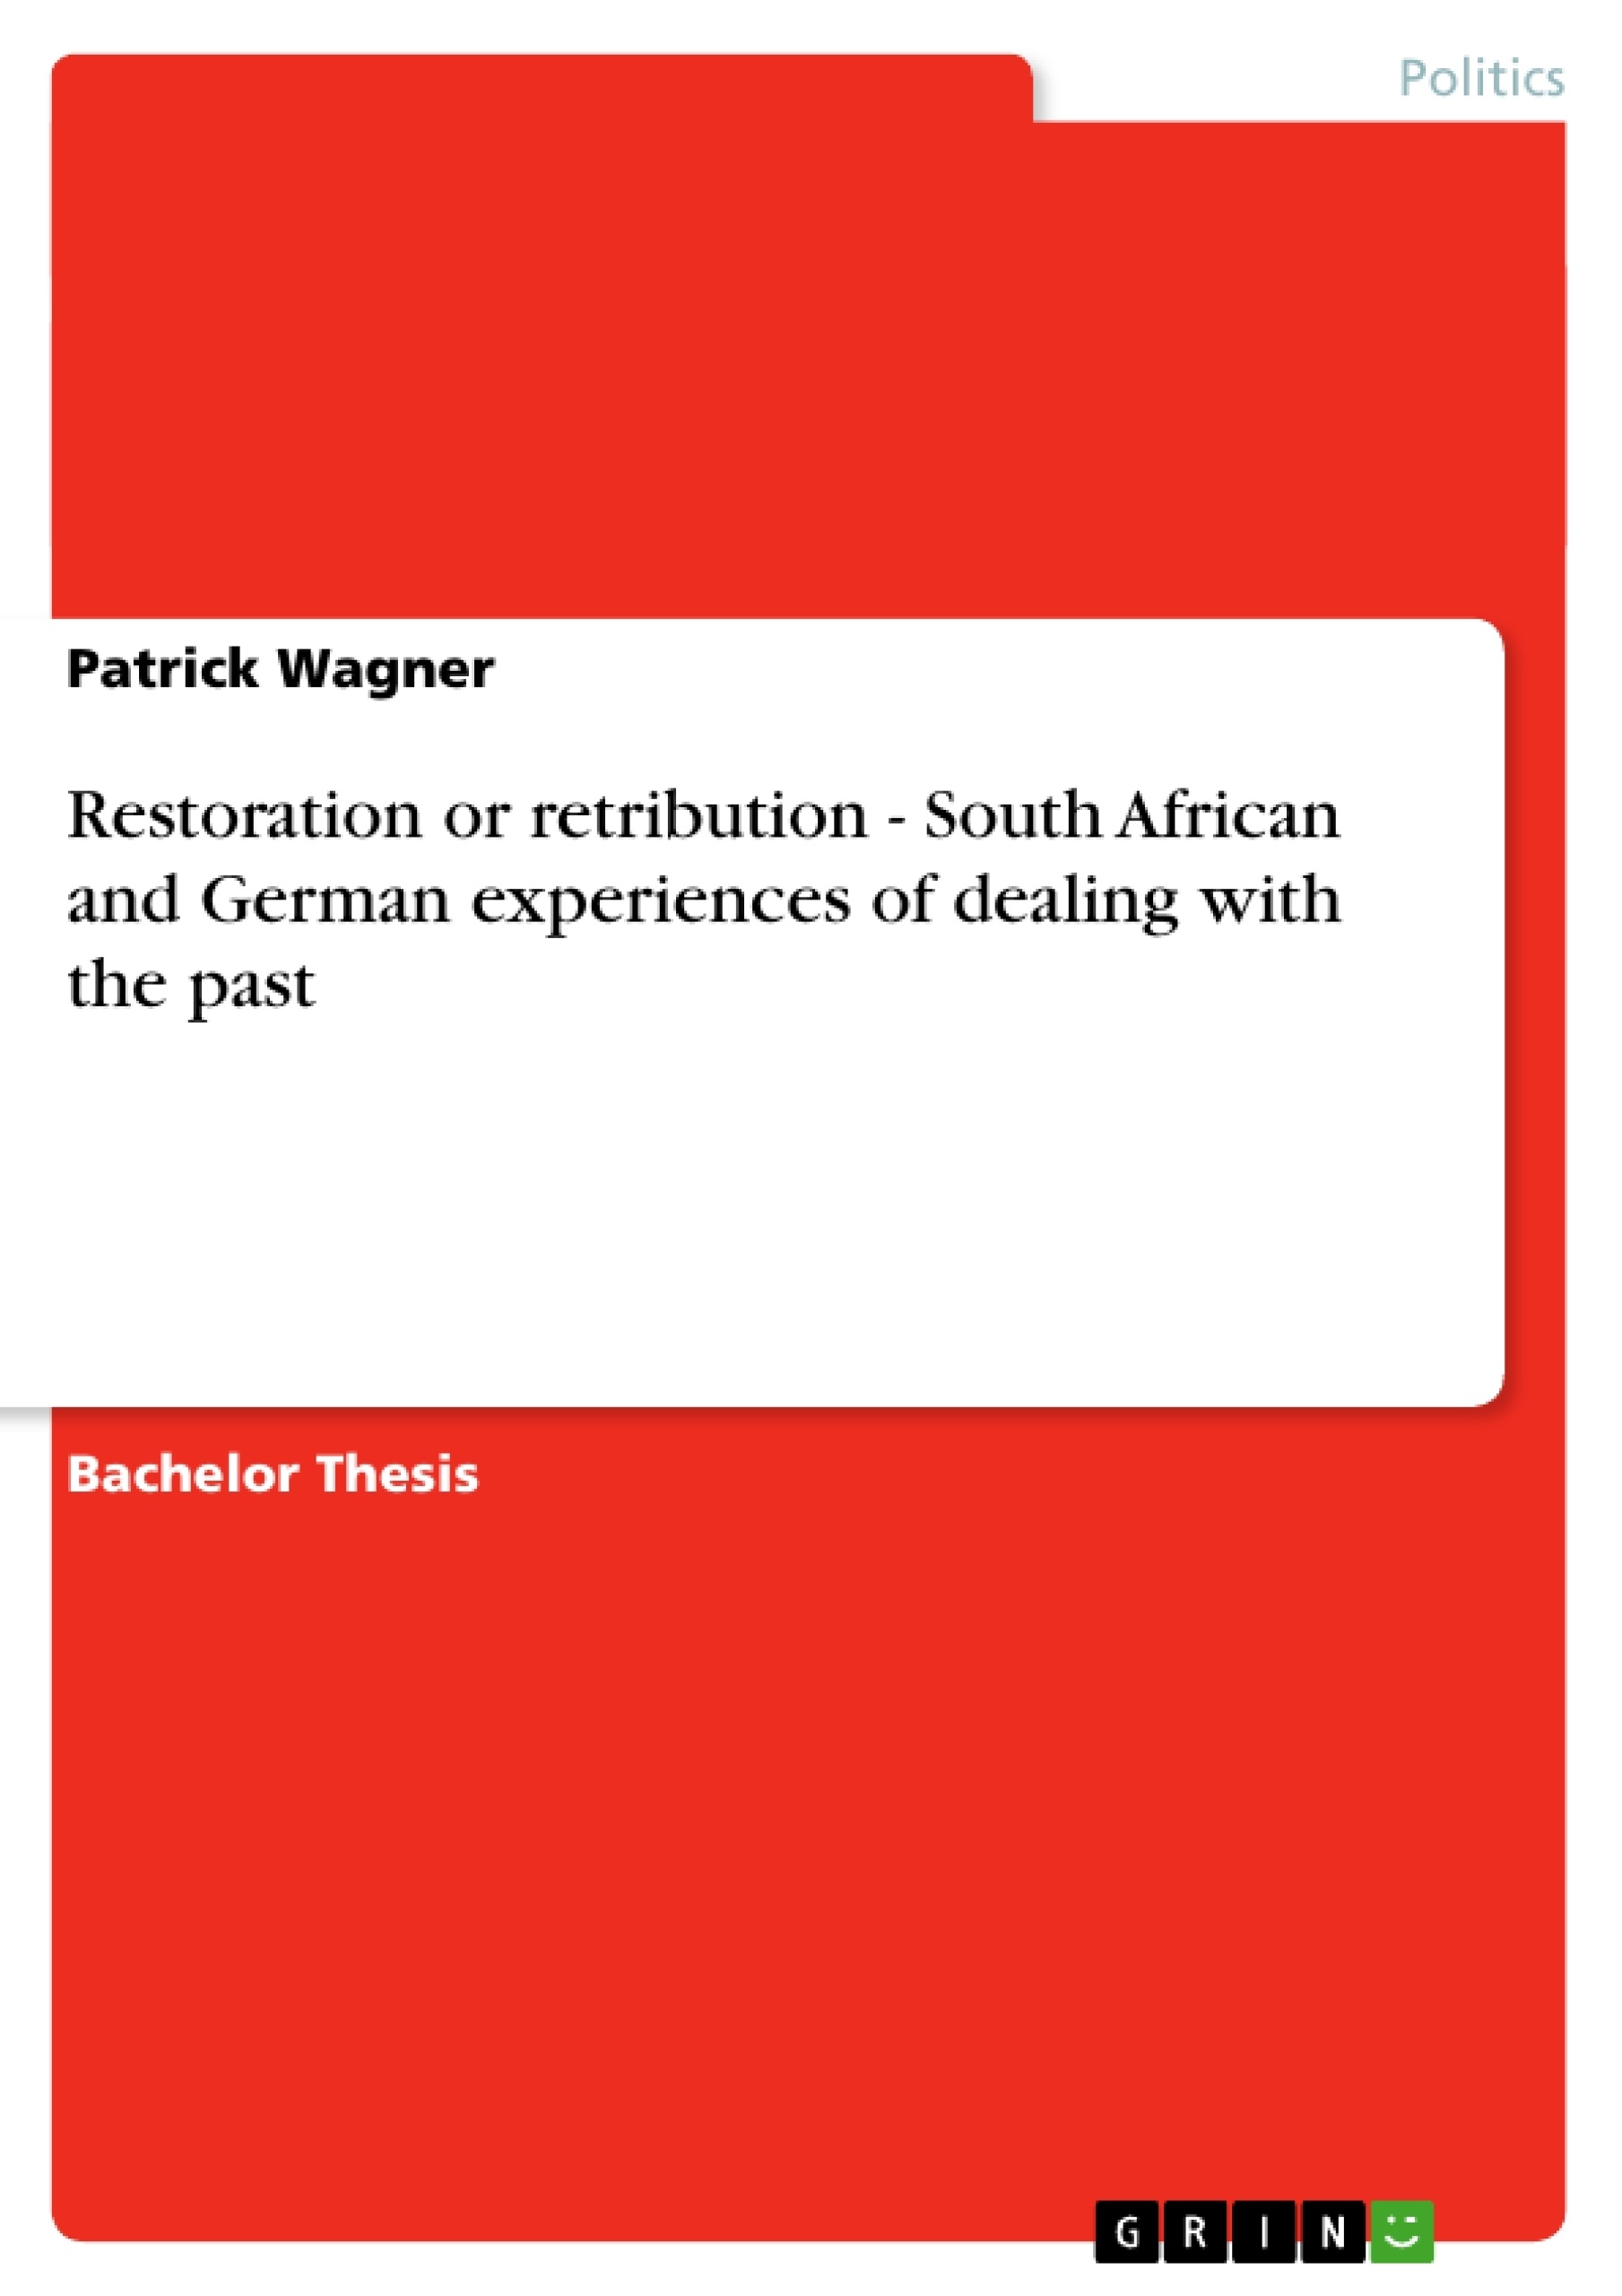 Título: Restoration or retribution - South African and German experiences of dealing with the past